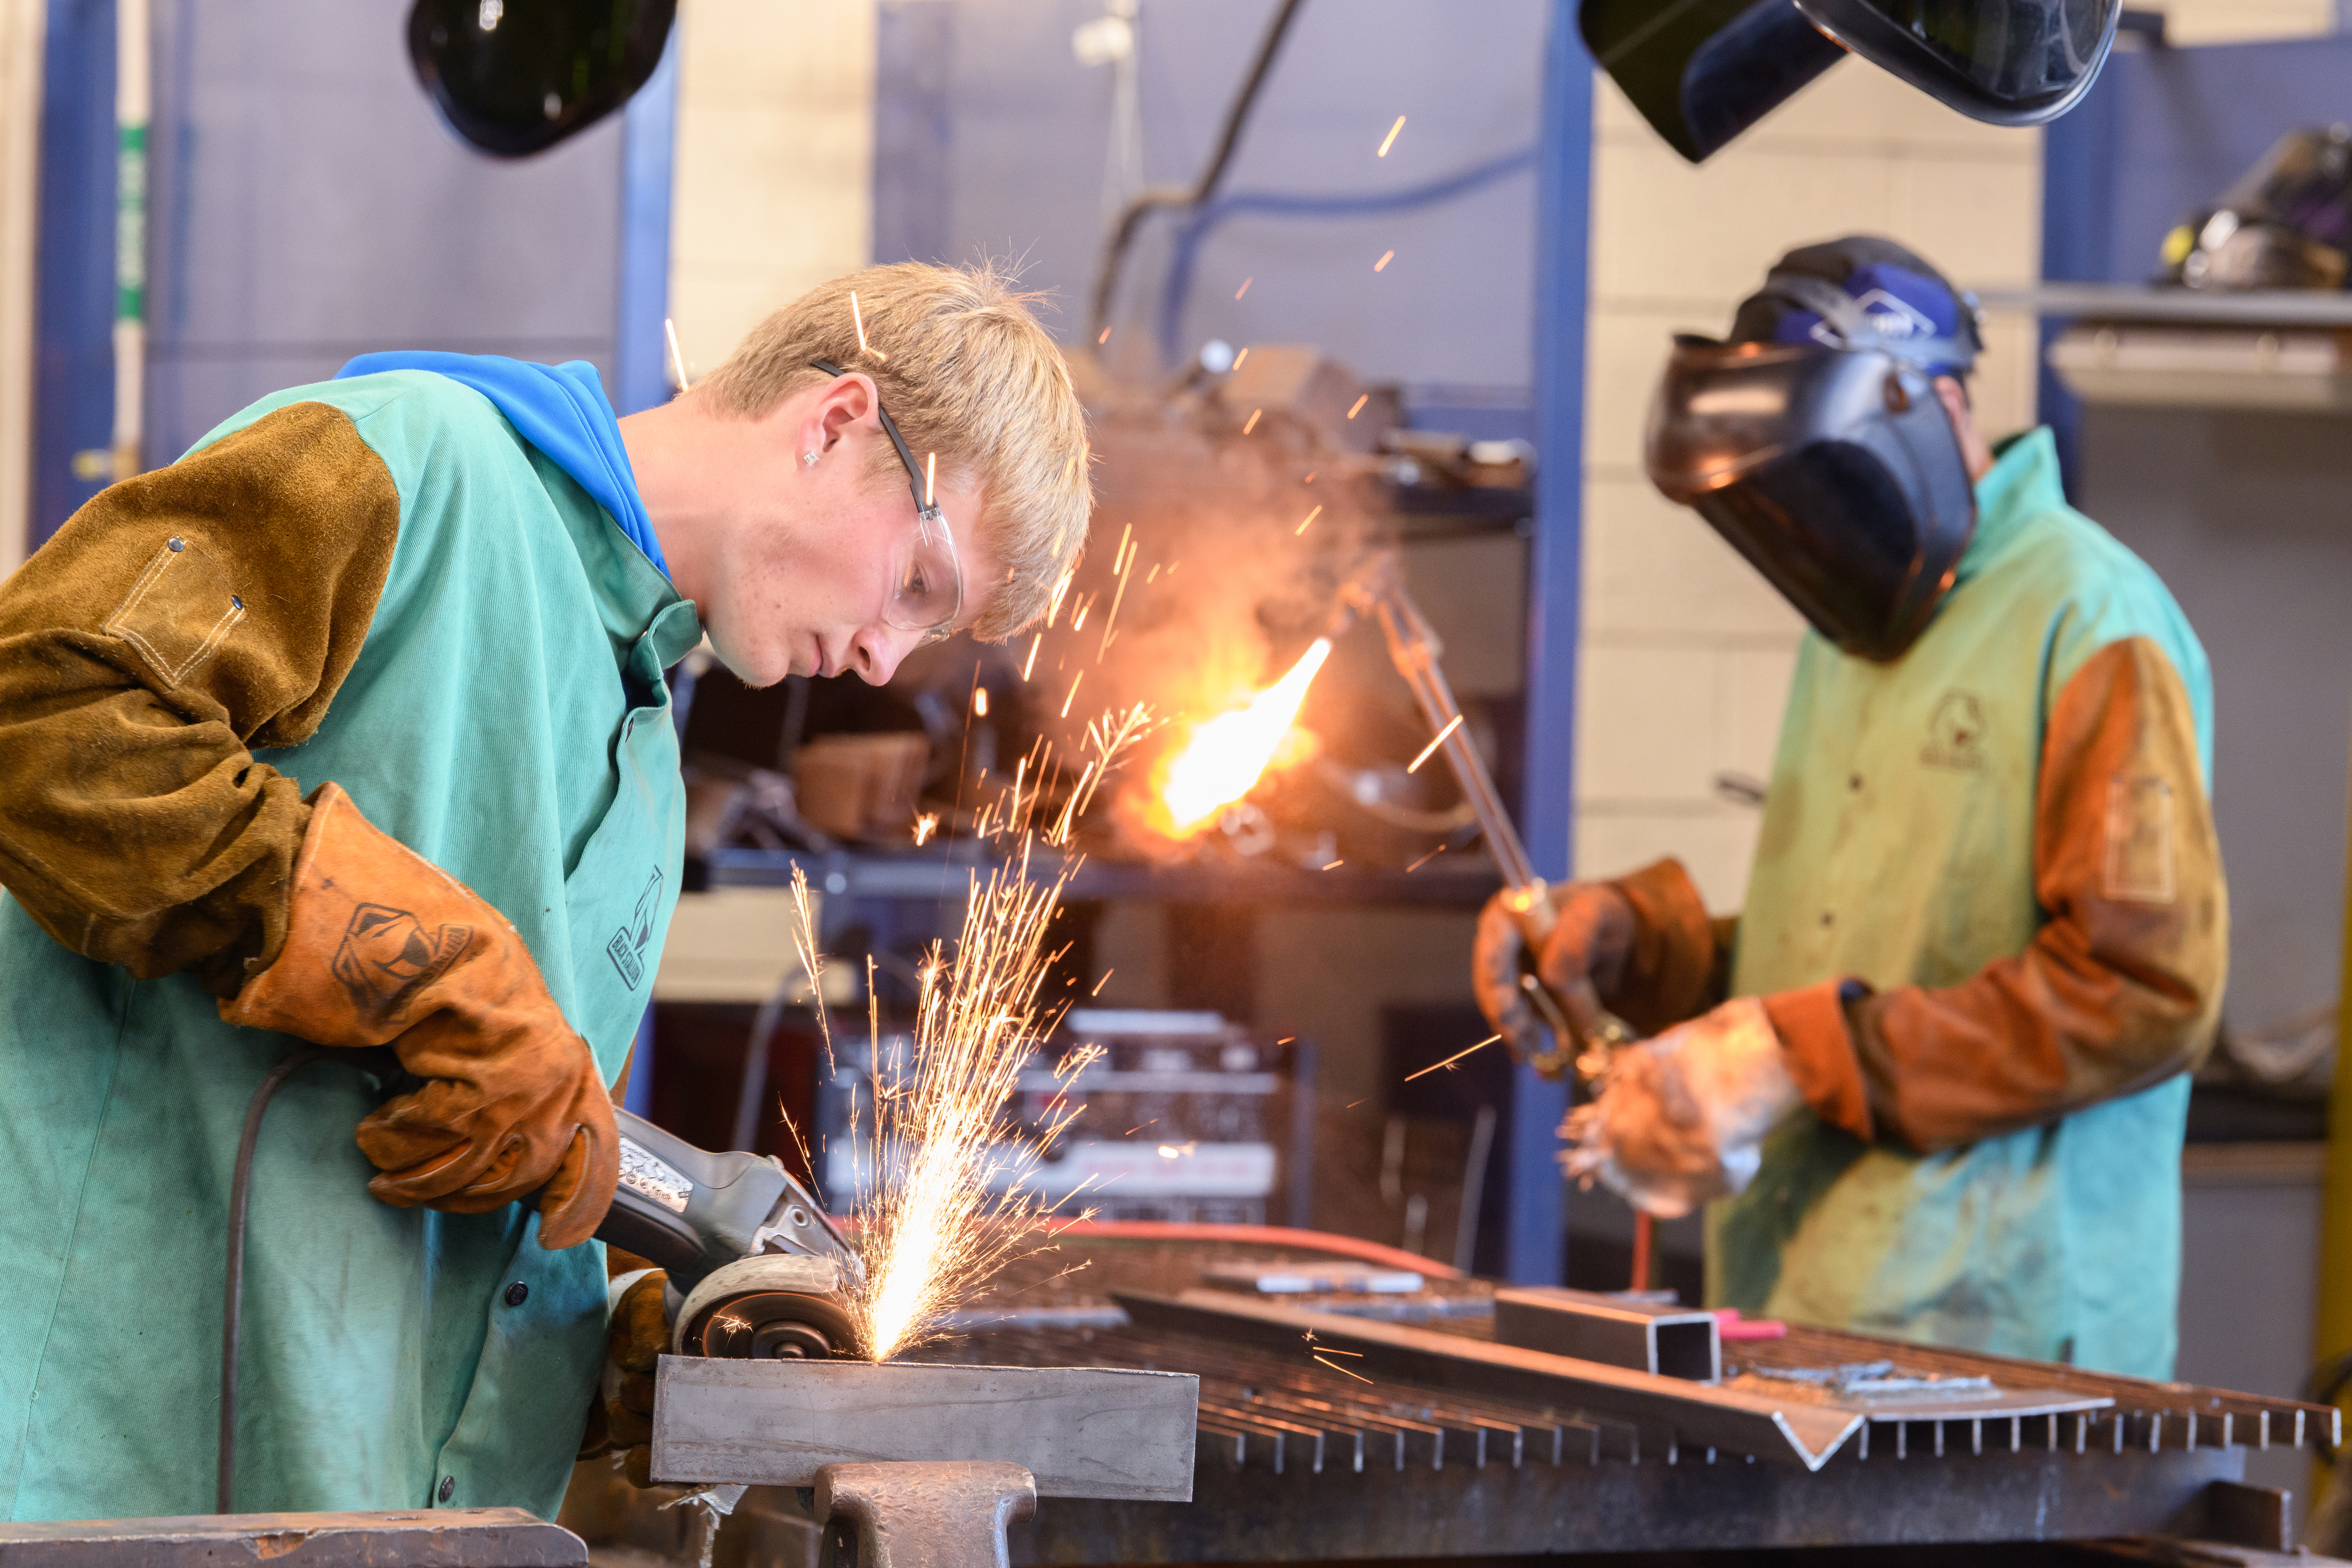 Two welding students work together in the lab cutting and grinding metal.